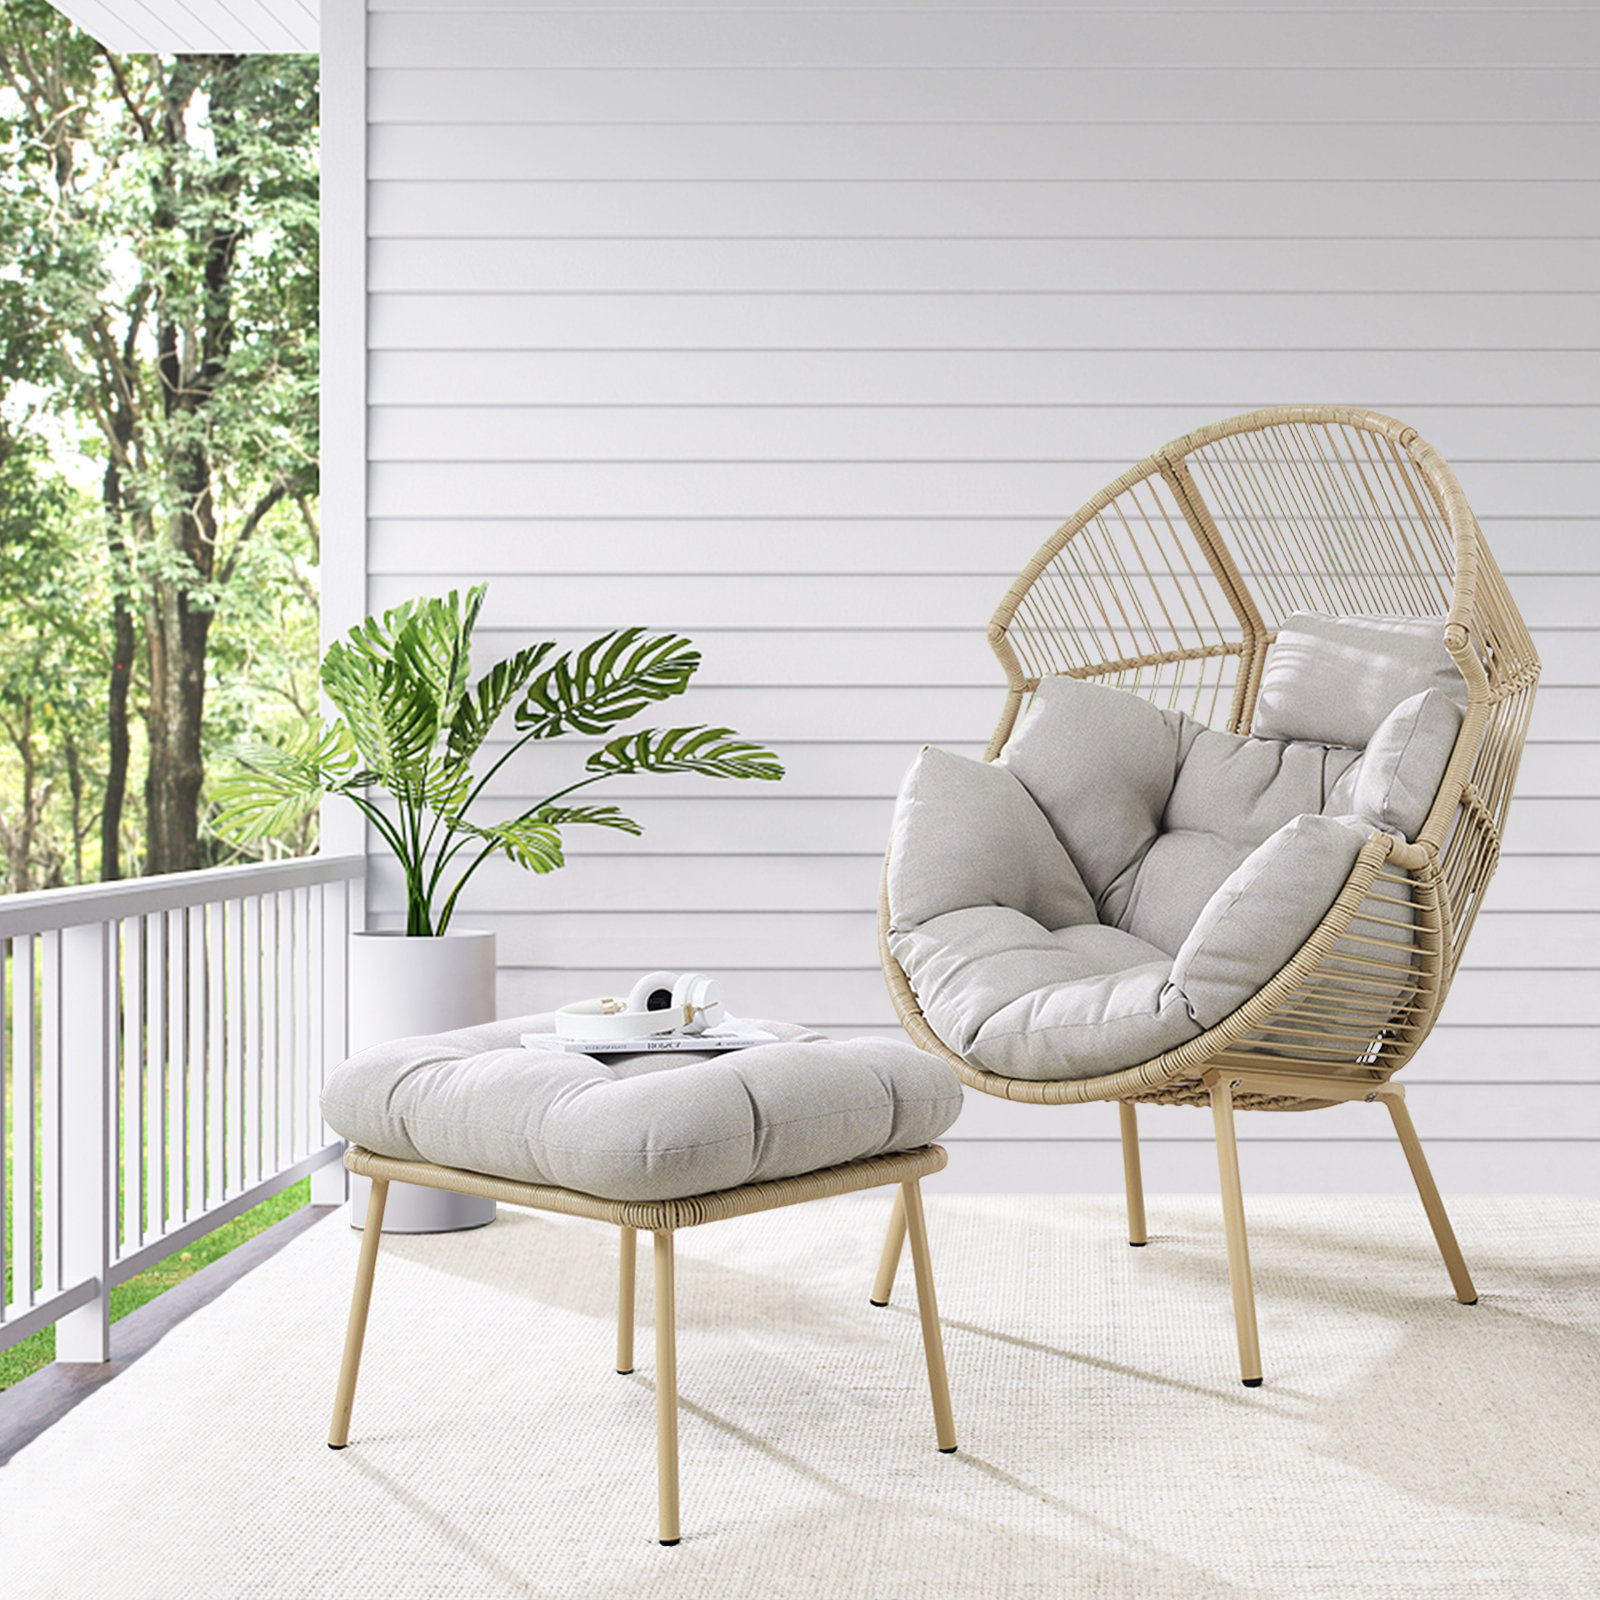 GOOGIC Patio Wicker Egg Chair, Egg Basket Chair with Cushion, Outdoor Patio  Lounge Basket with Stand for Patio Backyard Porch - Beige